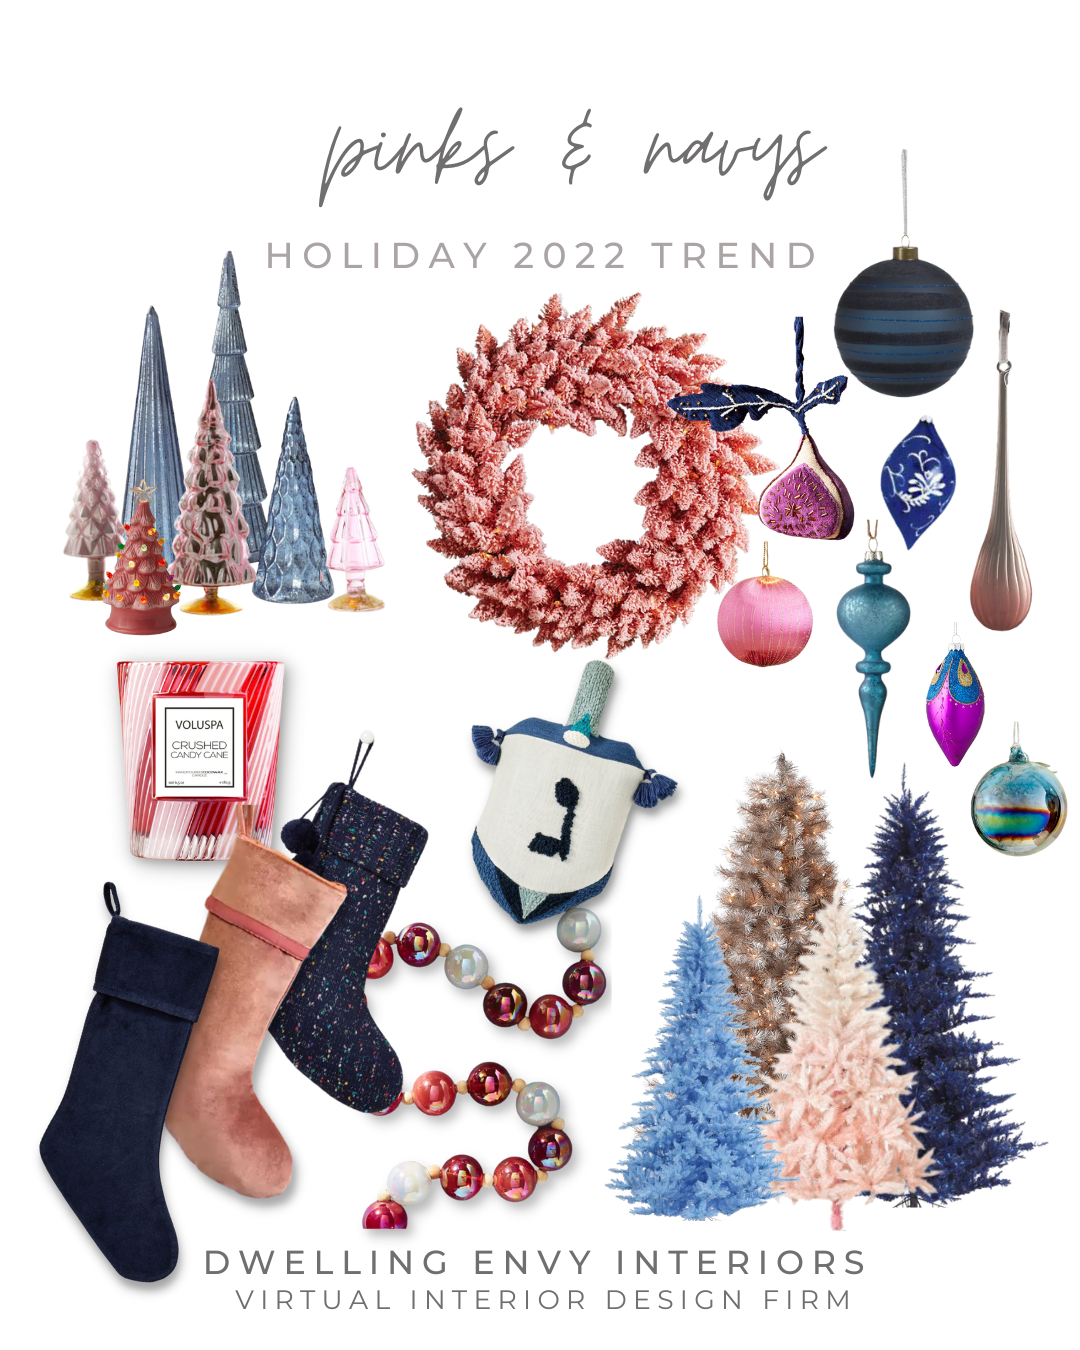 image of HOT PINK AND NAVY BLUE TRENDChristmas Home Decor items recommended by Dwelling Envy Interiors GLASS TABLETOP CHRISTMAS TREES, PINK WREATH, GLASS GARLAND IN HOT PINK, BLUE AND PINK FAUX CHRISTMAS TREES, VELVET NAVY CHRISTMAS STOCKING, PINK AND NAVY KNITTED CHRISTMAS STOCKING